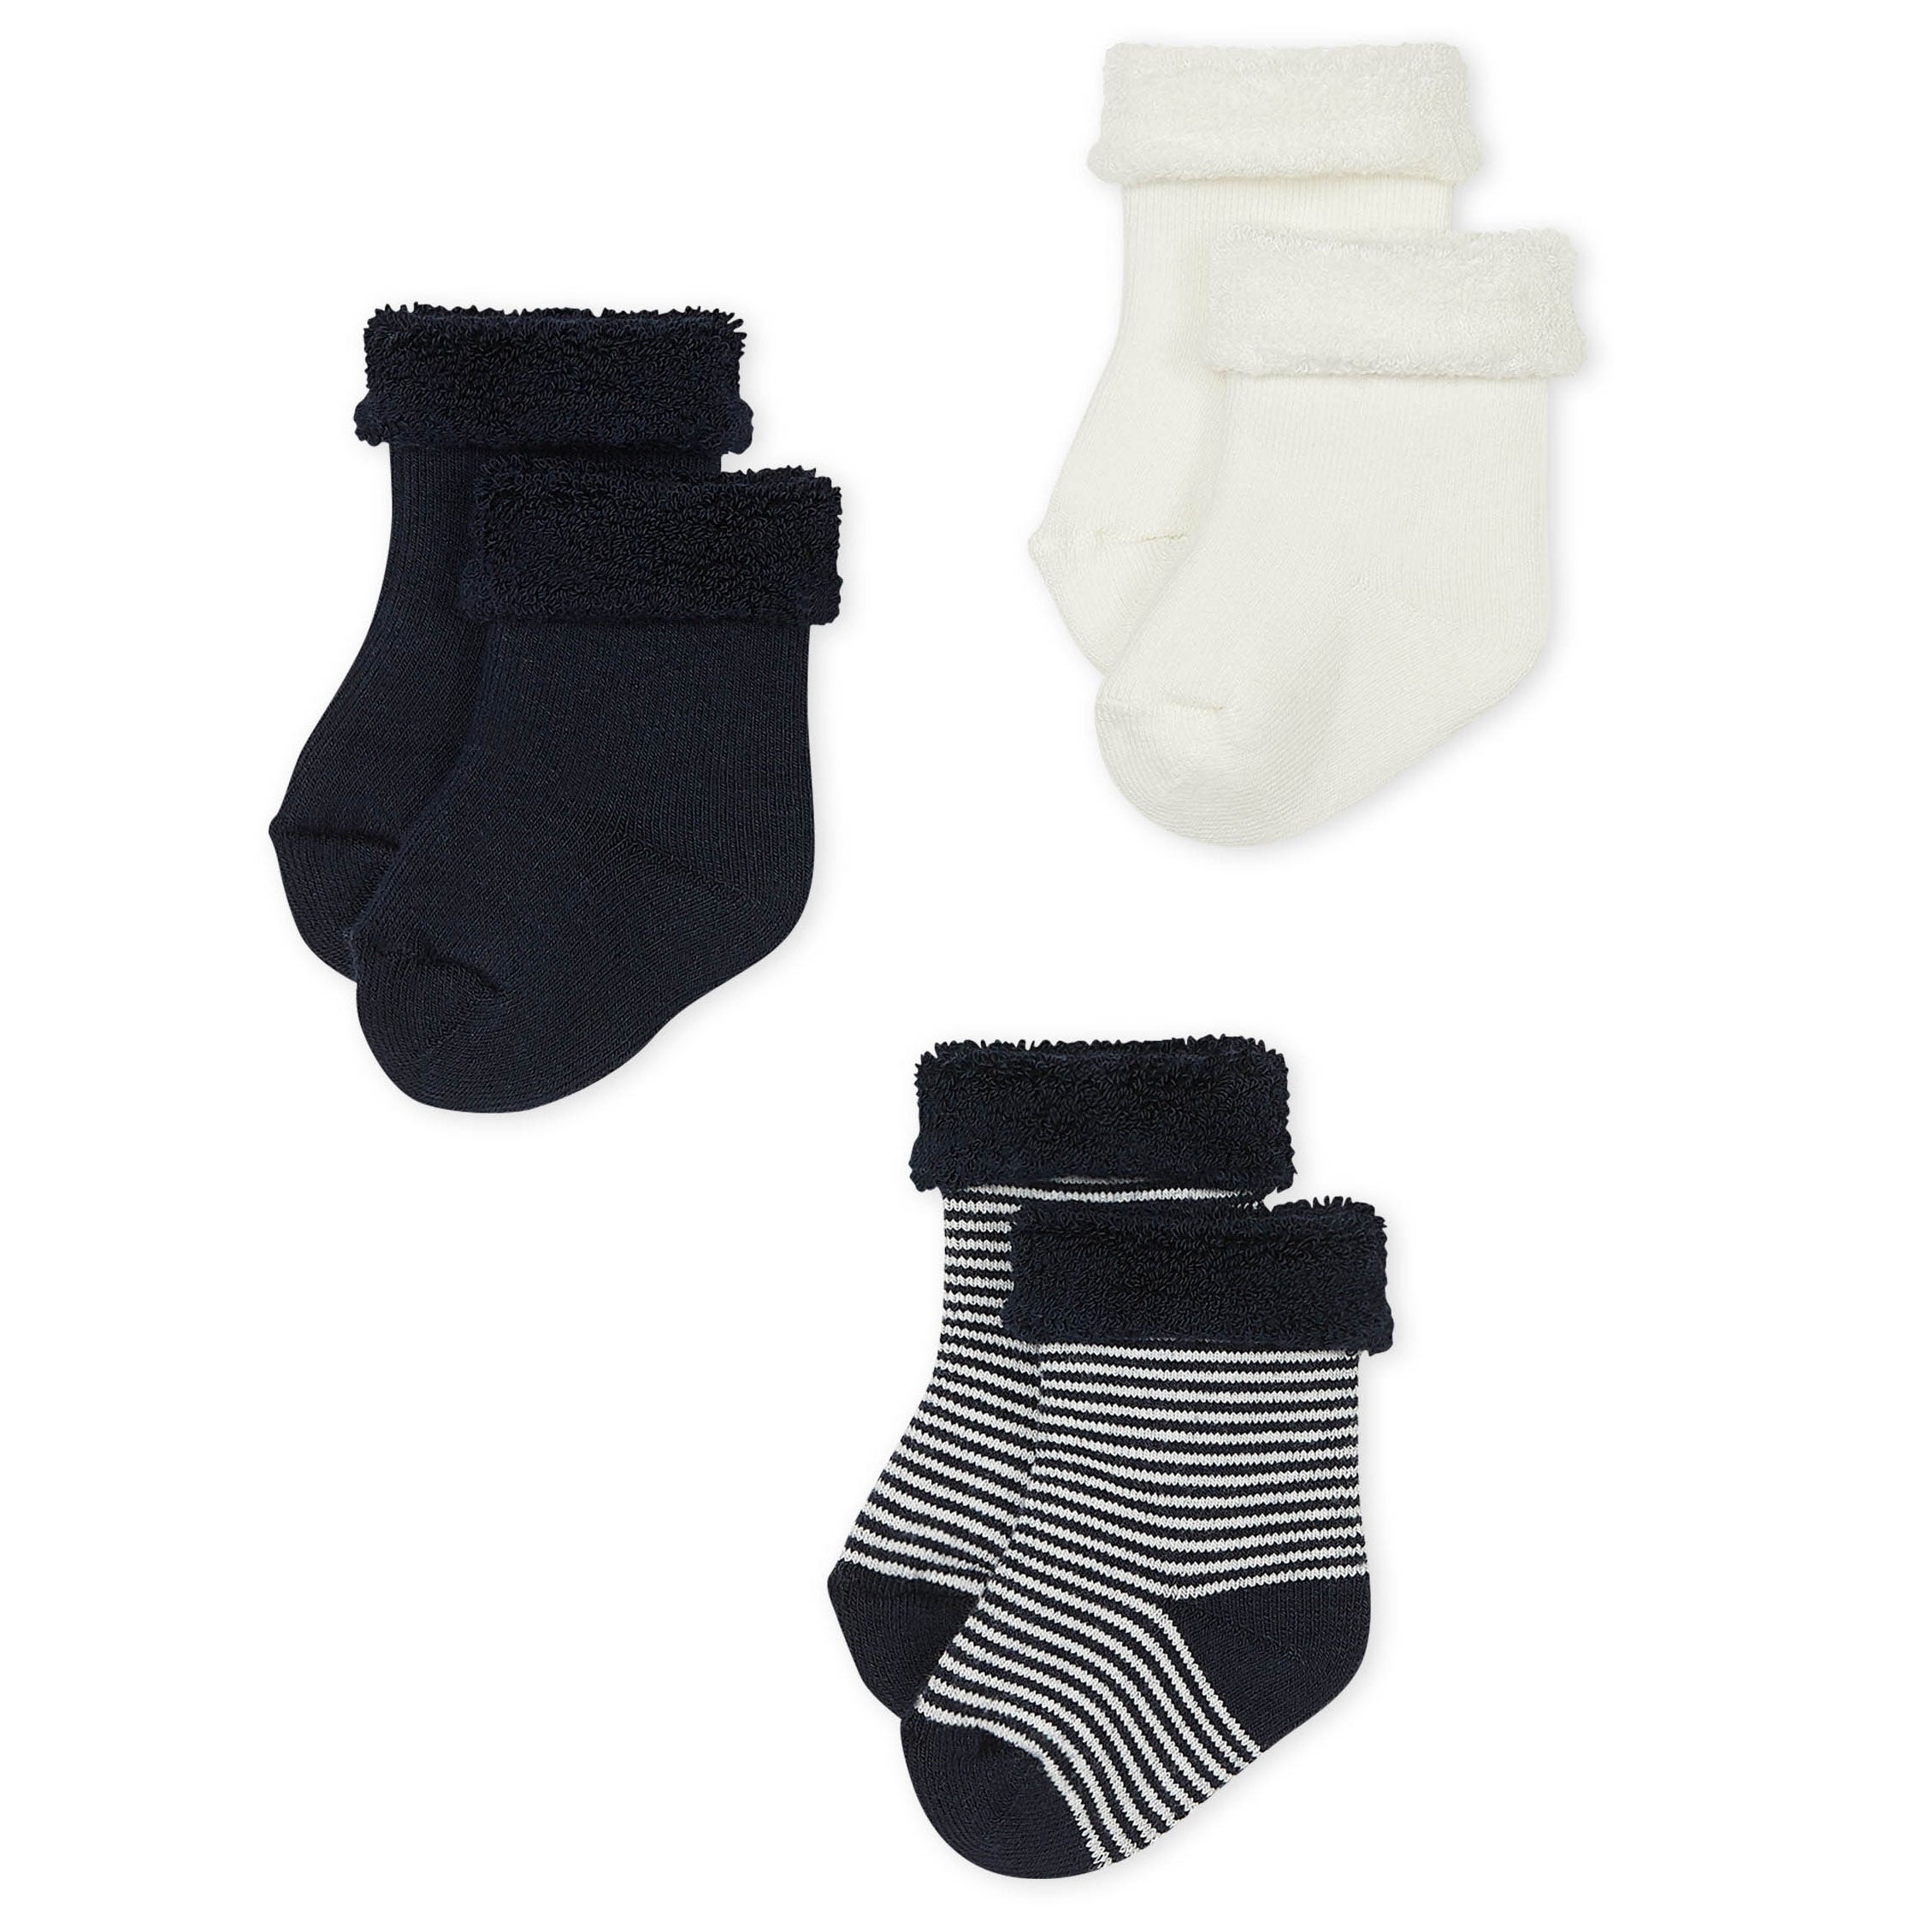 Petit Bateau Iconic Print  Socks at Bonjour Baby Baskets, best baby gifts